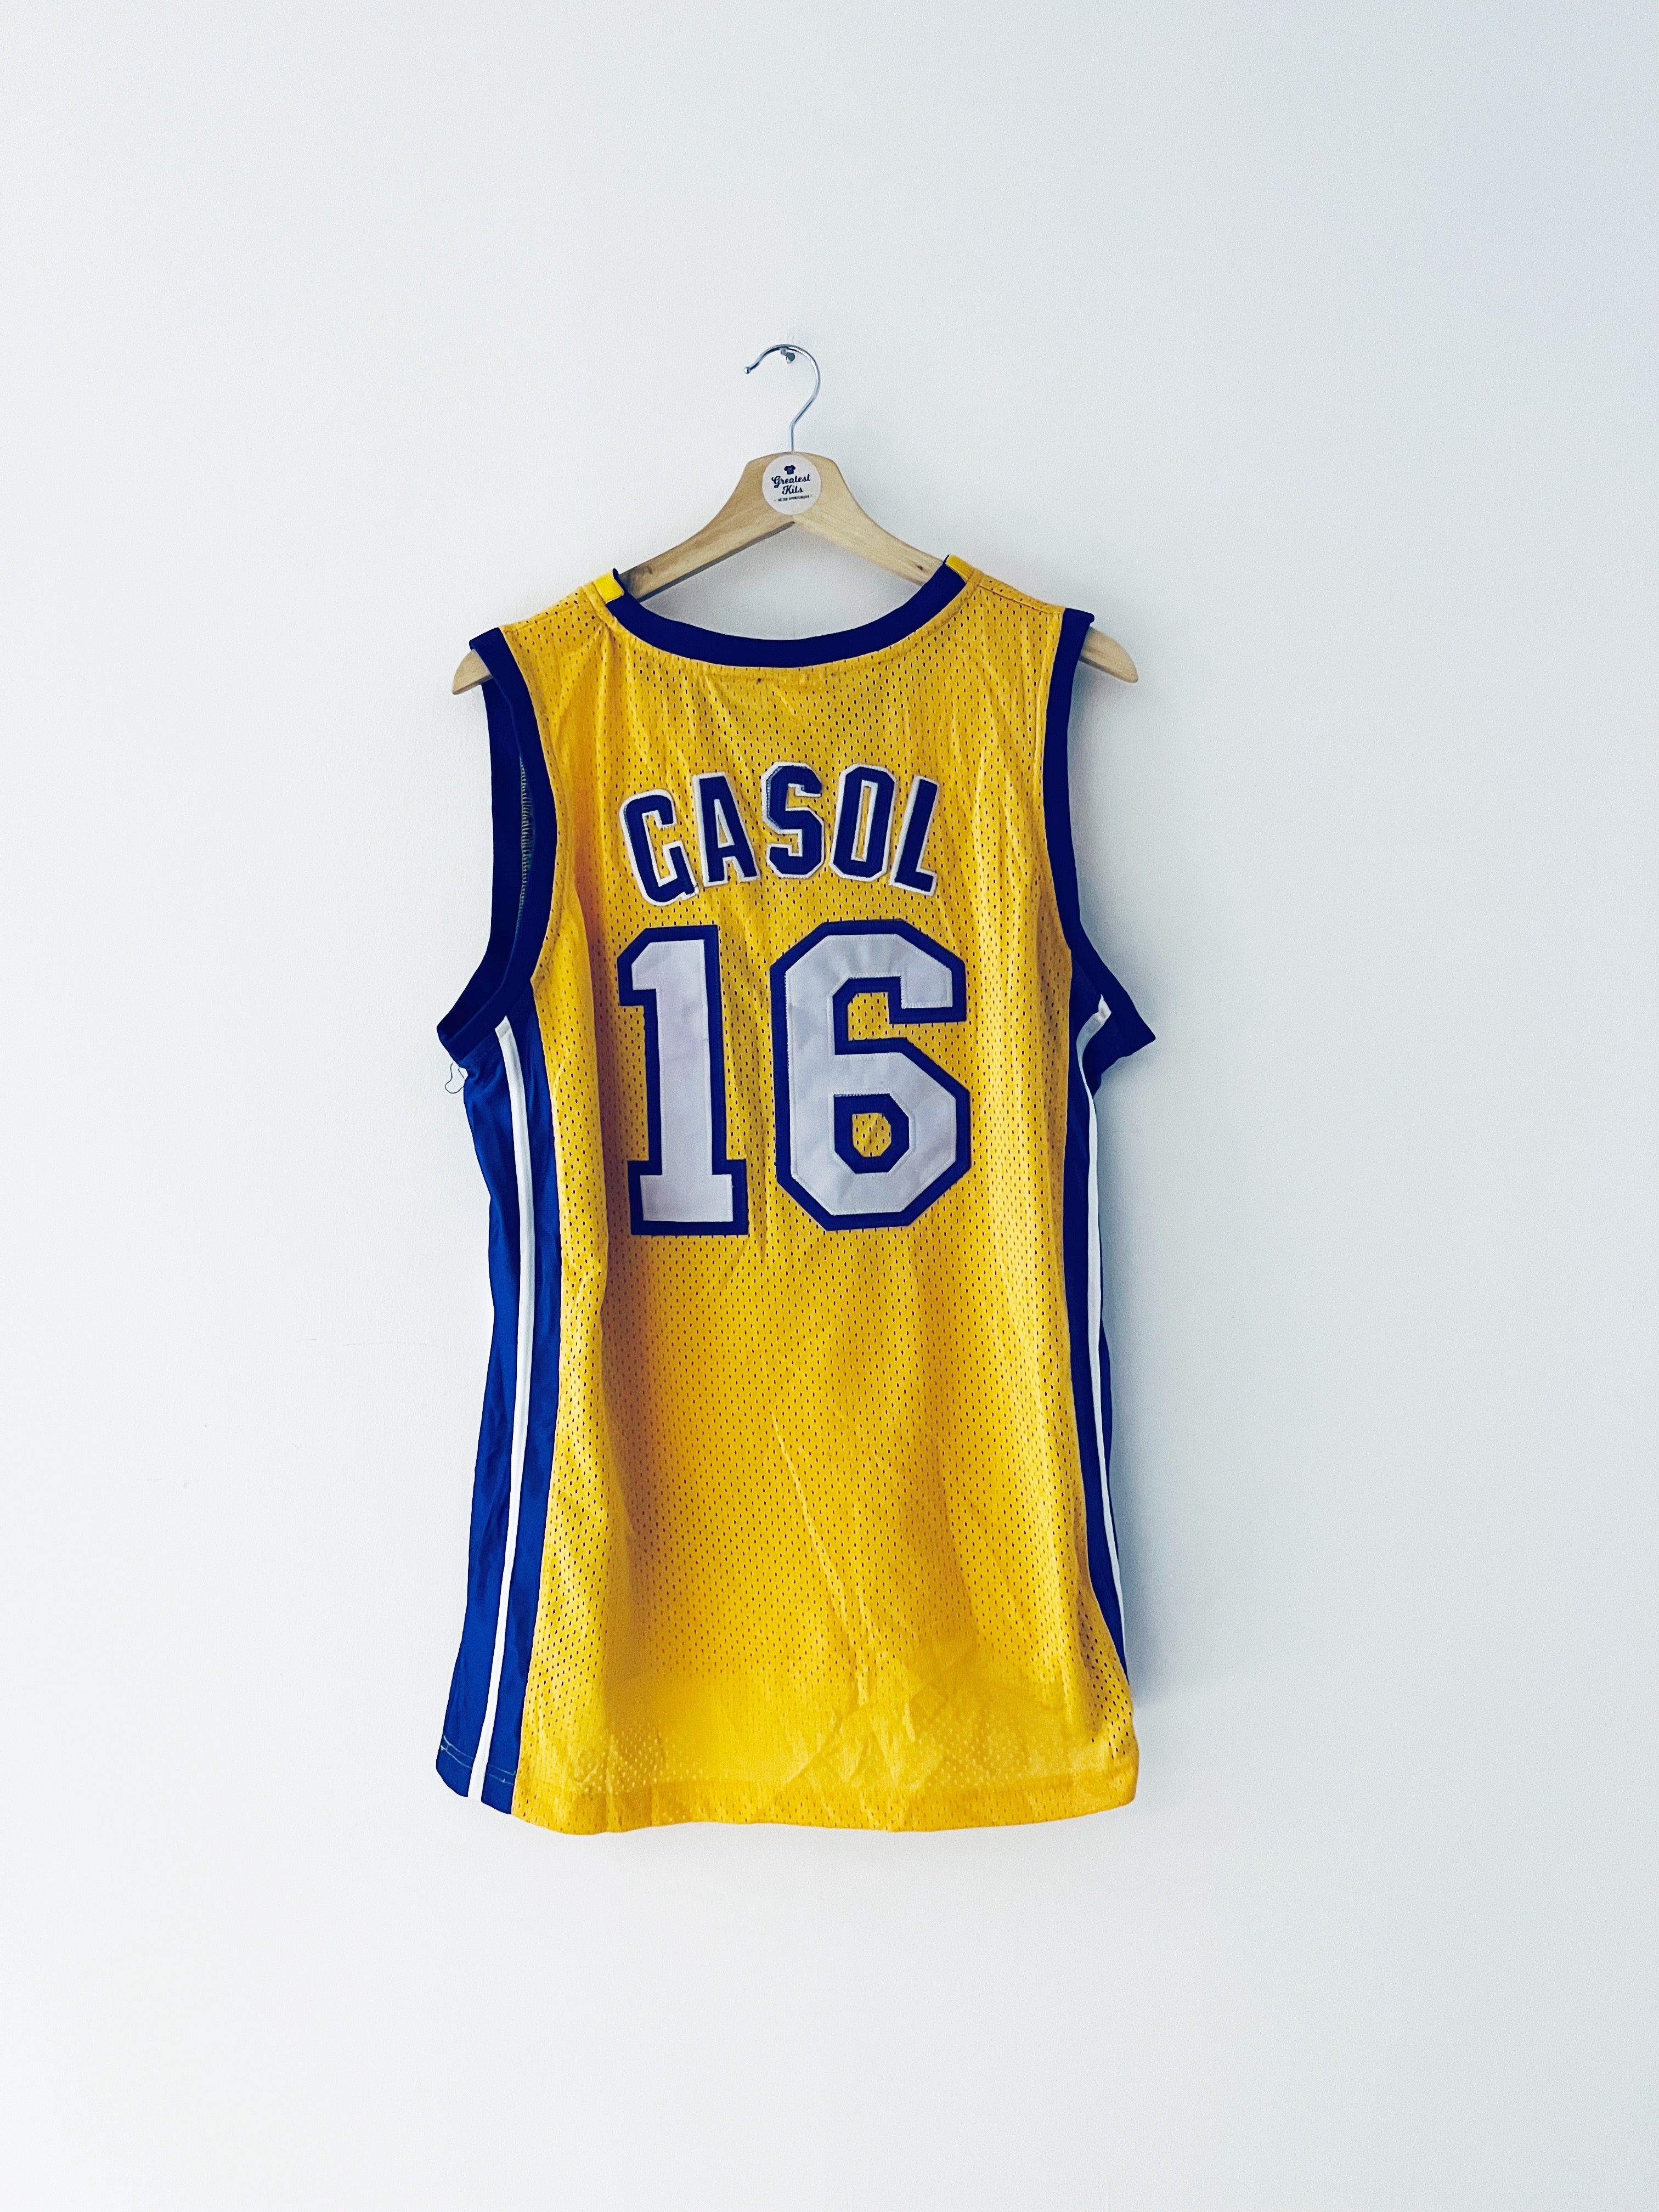 2010-14 Los Angeles Lakers Adidas Home Jersey Gasol #16 (S) 9/10